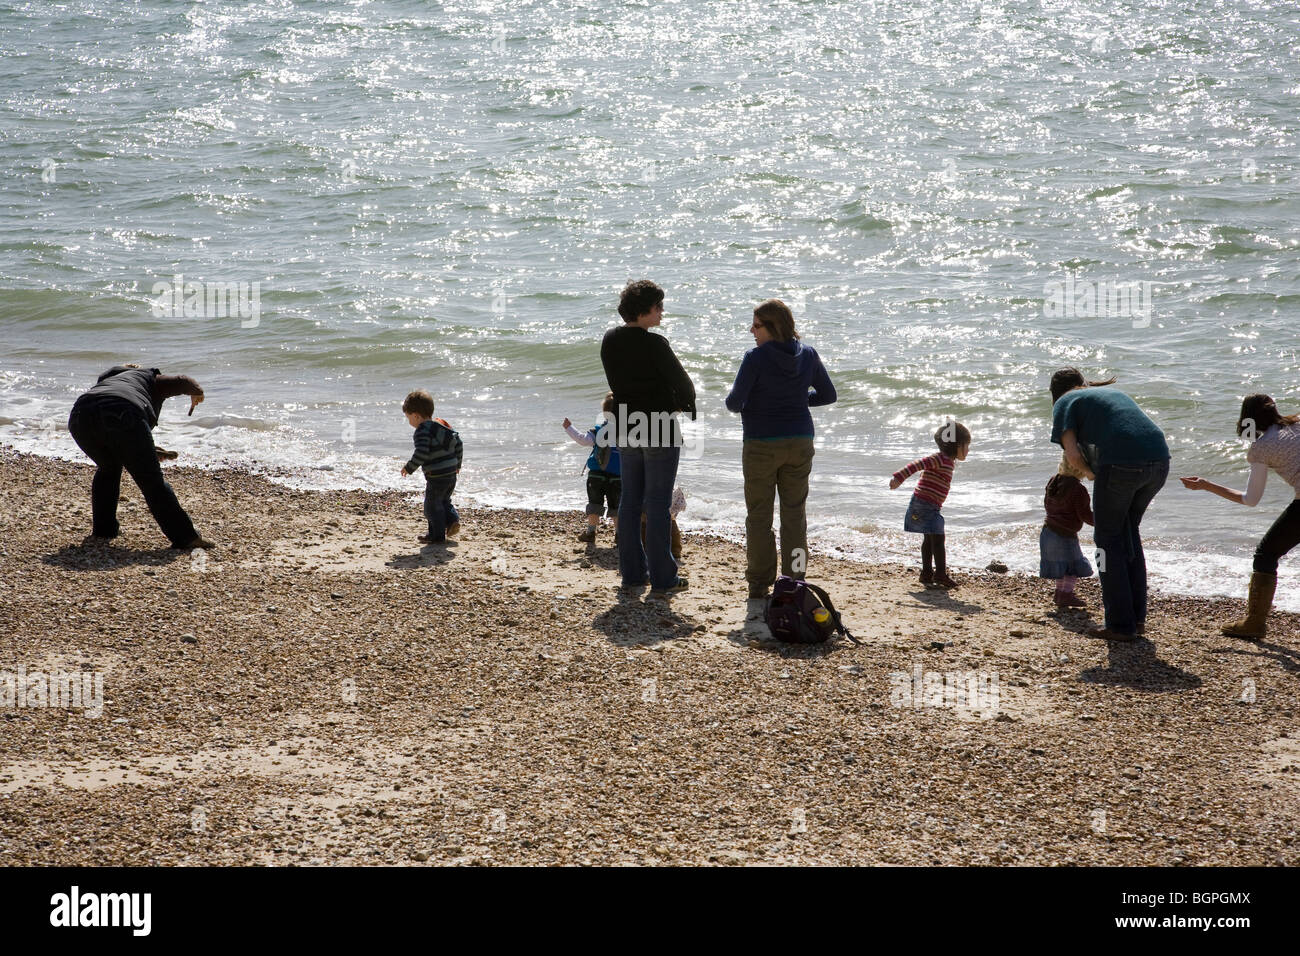 Women and children on the beach near the entrance to Portsmouth Harbour, England. Stock Photo